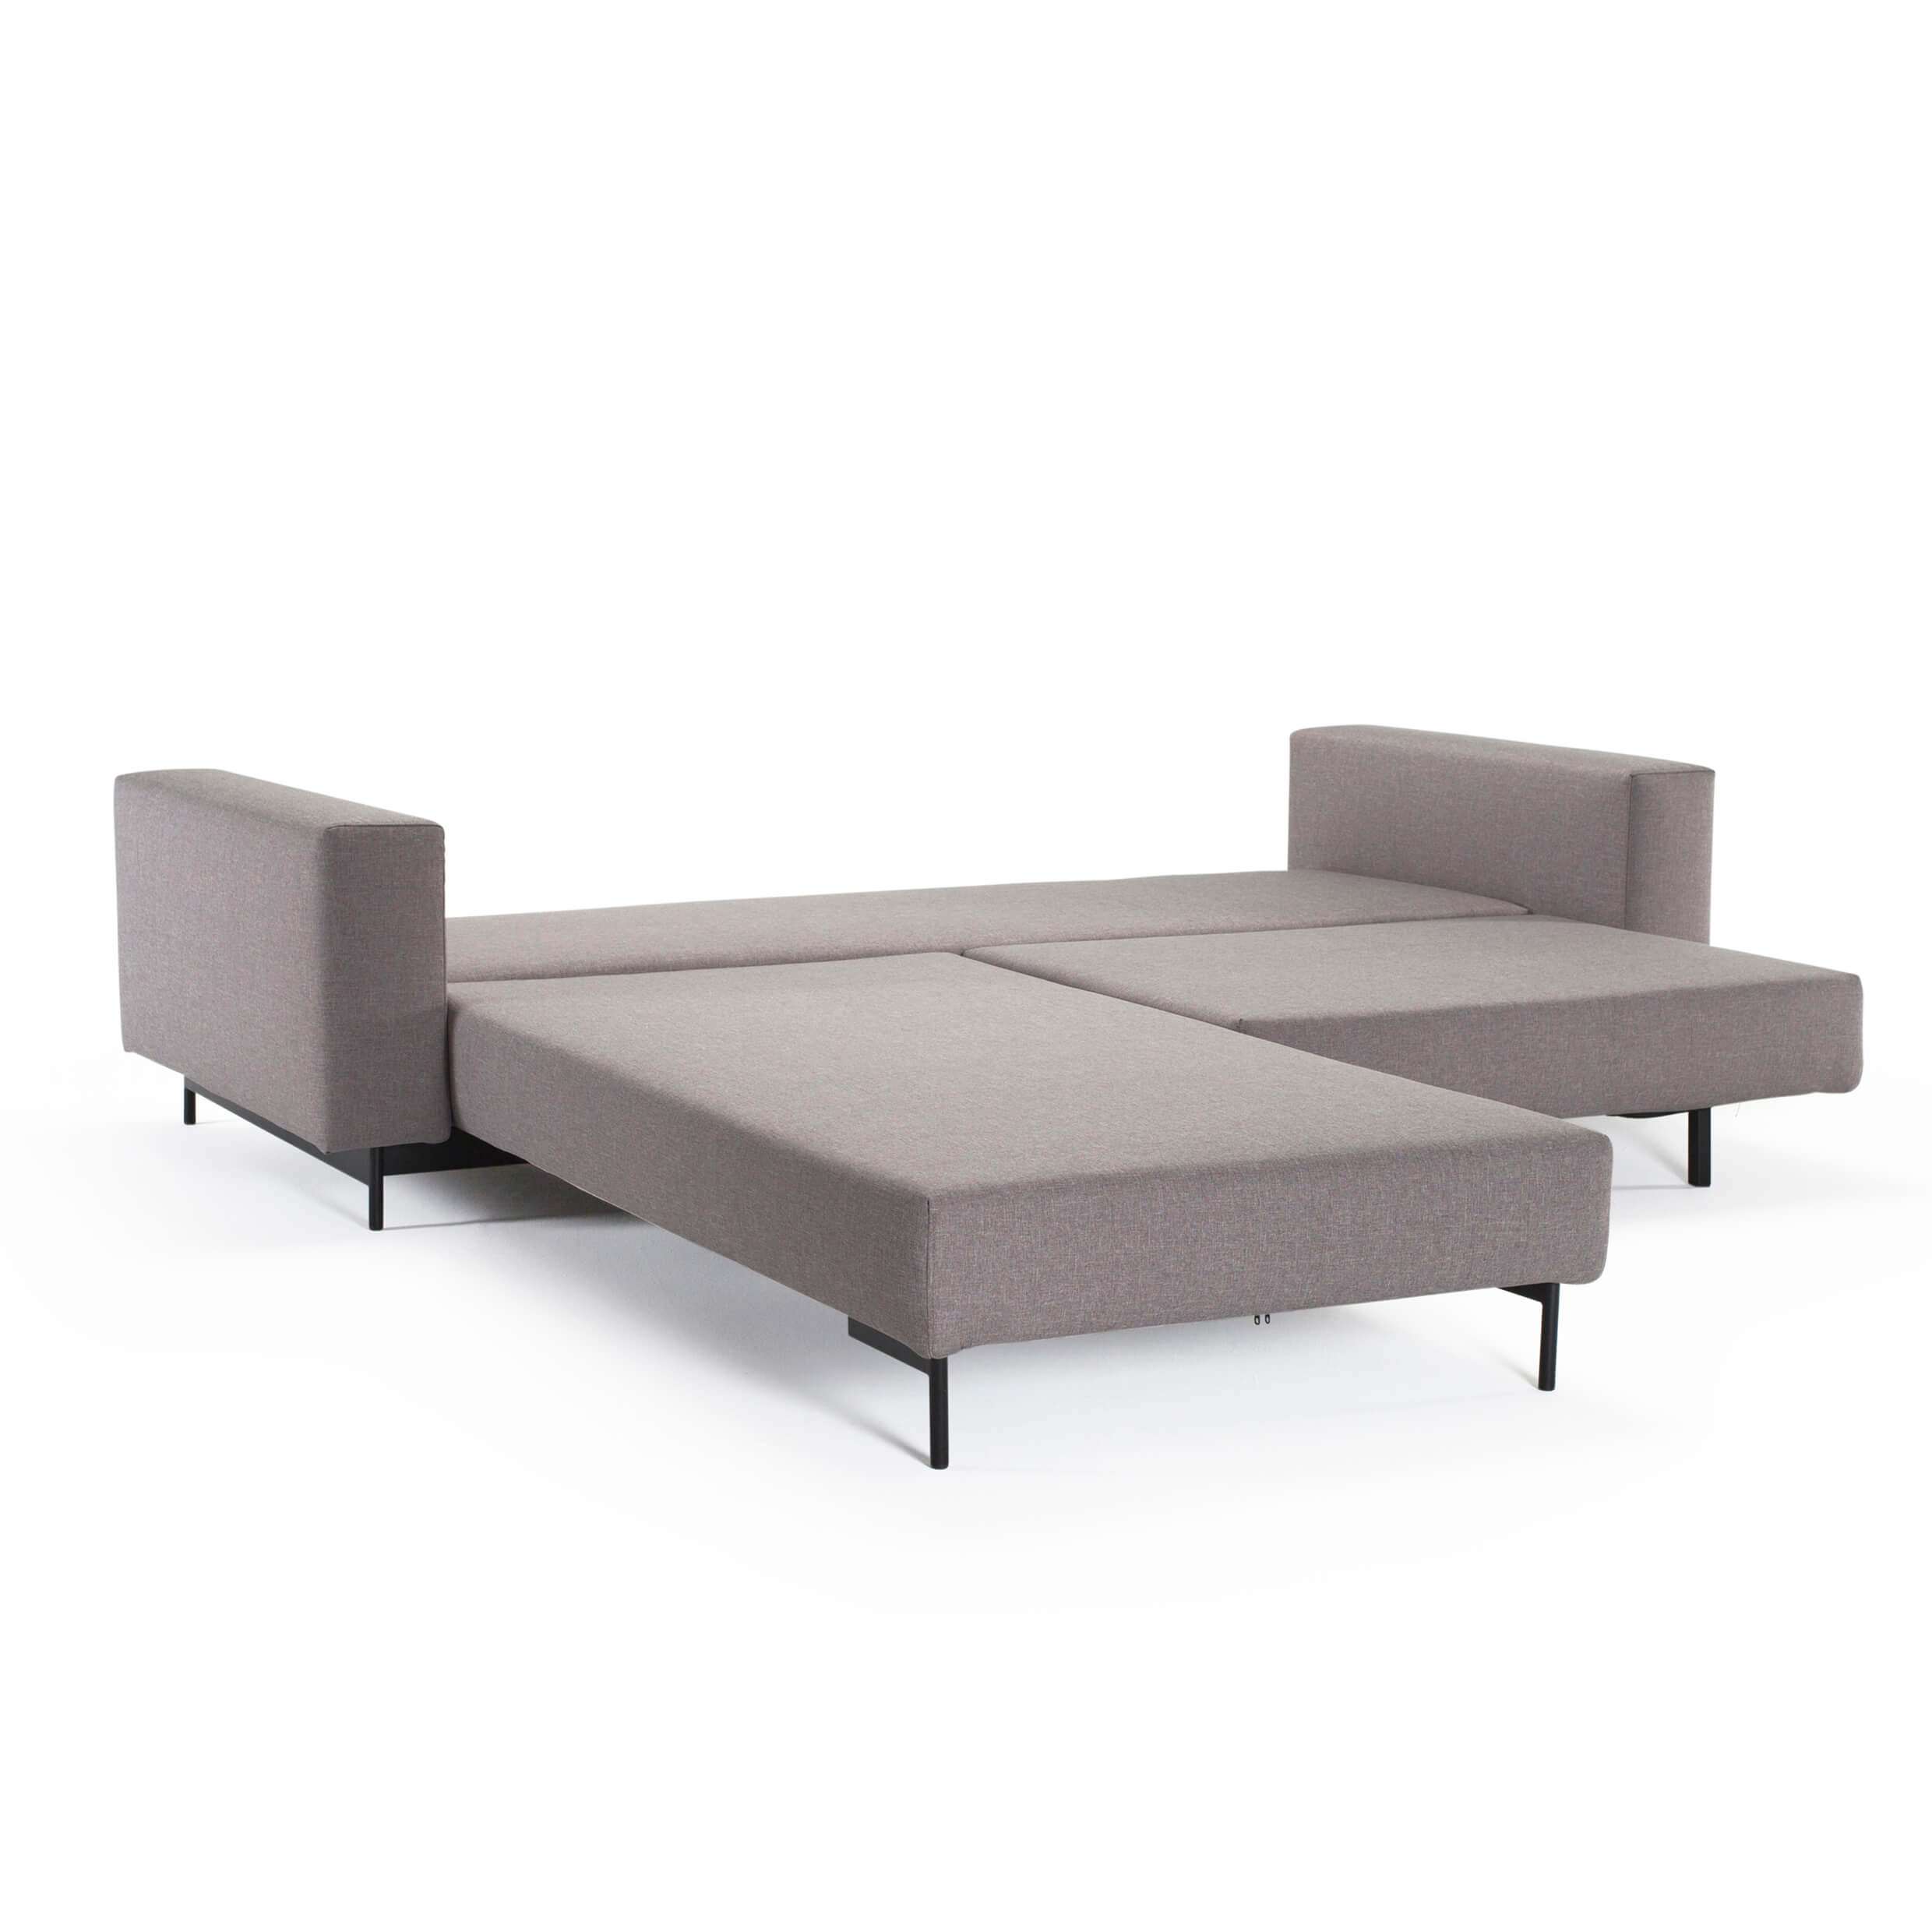 Sofa bed convertible unfolded view